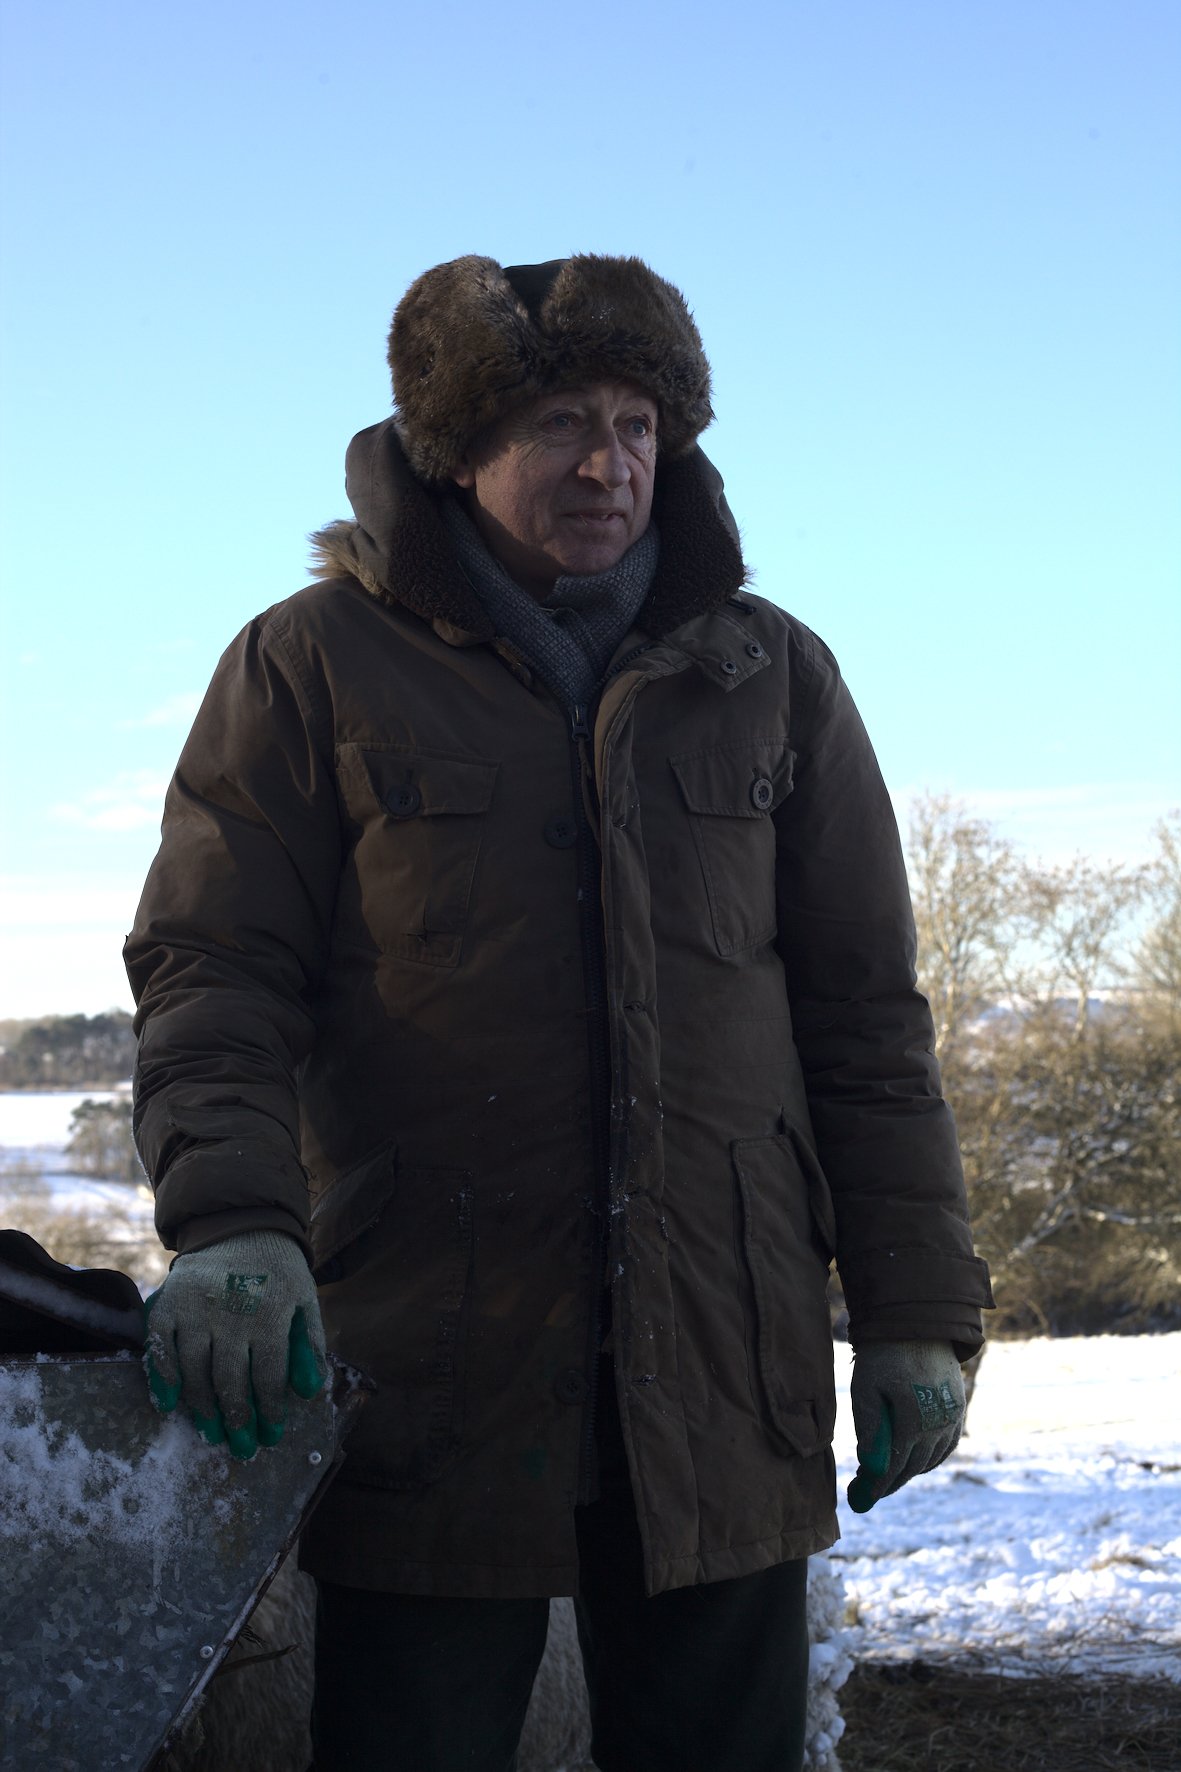 Portrait photograph by Hatty Frances Bell of a farmer wearing a big coat and hat standing in the snow in field with blue sky behind